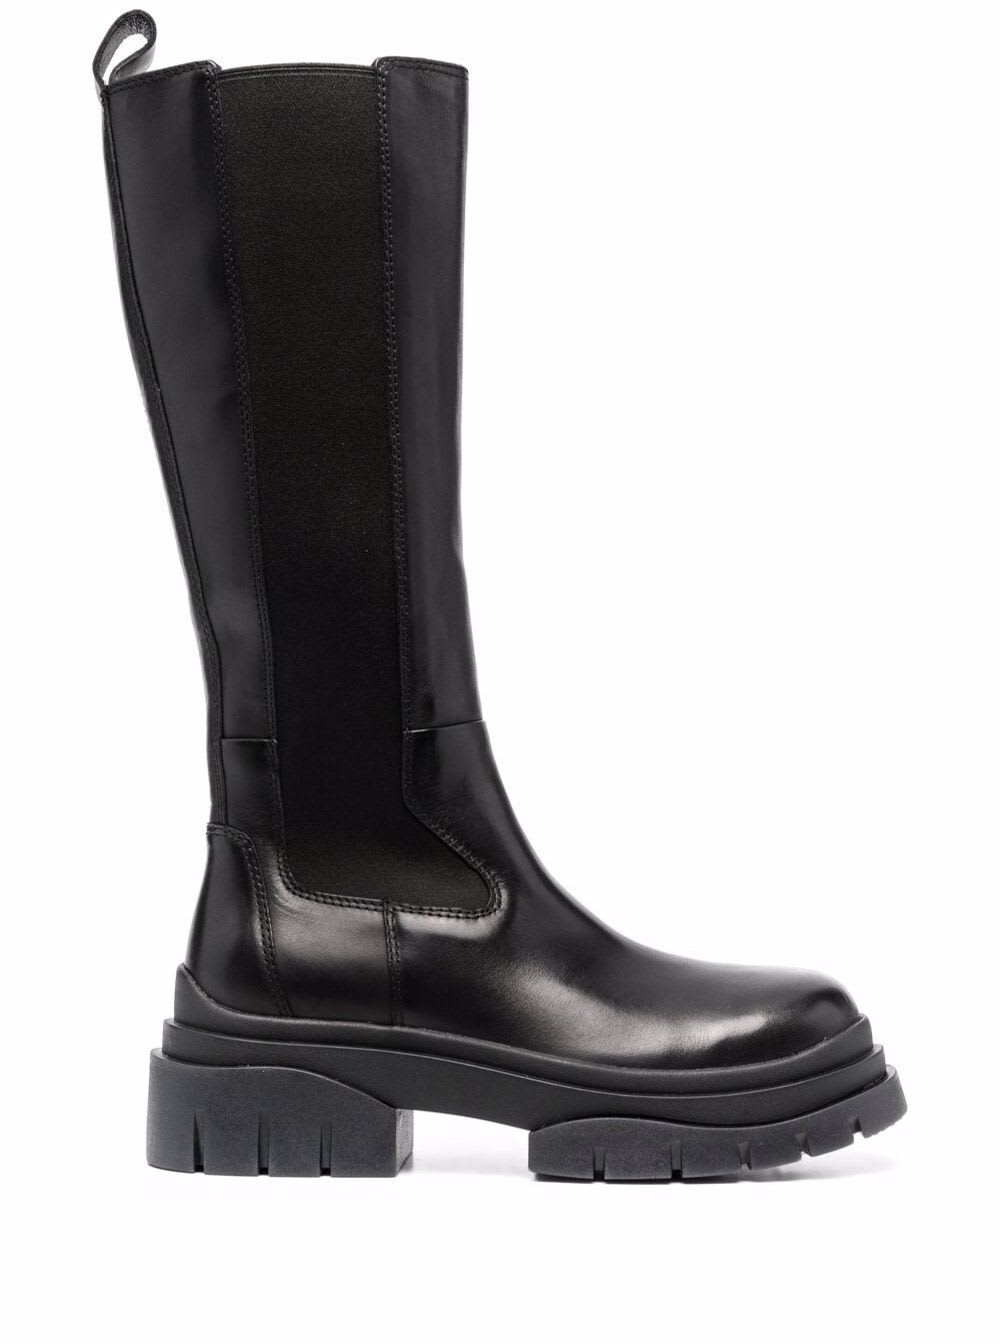 Ash Black Stone Leather Boots